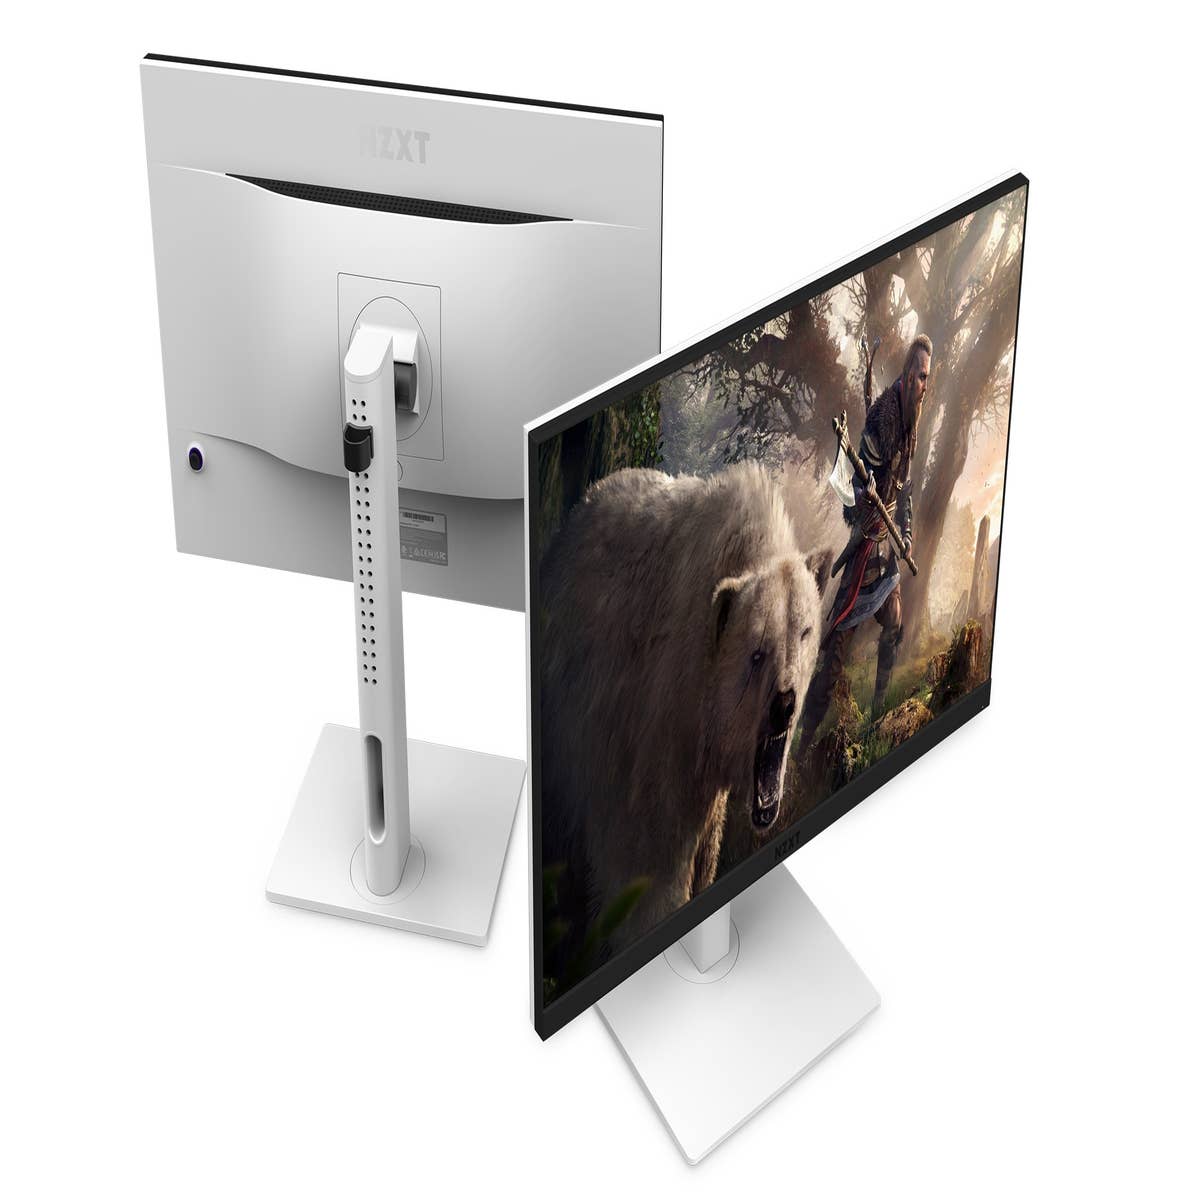 NZXT are making gaming monitors now, and they're lookin' sharp